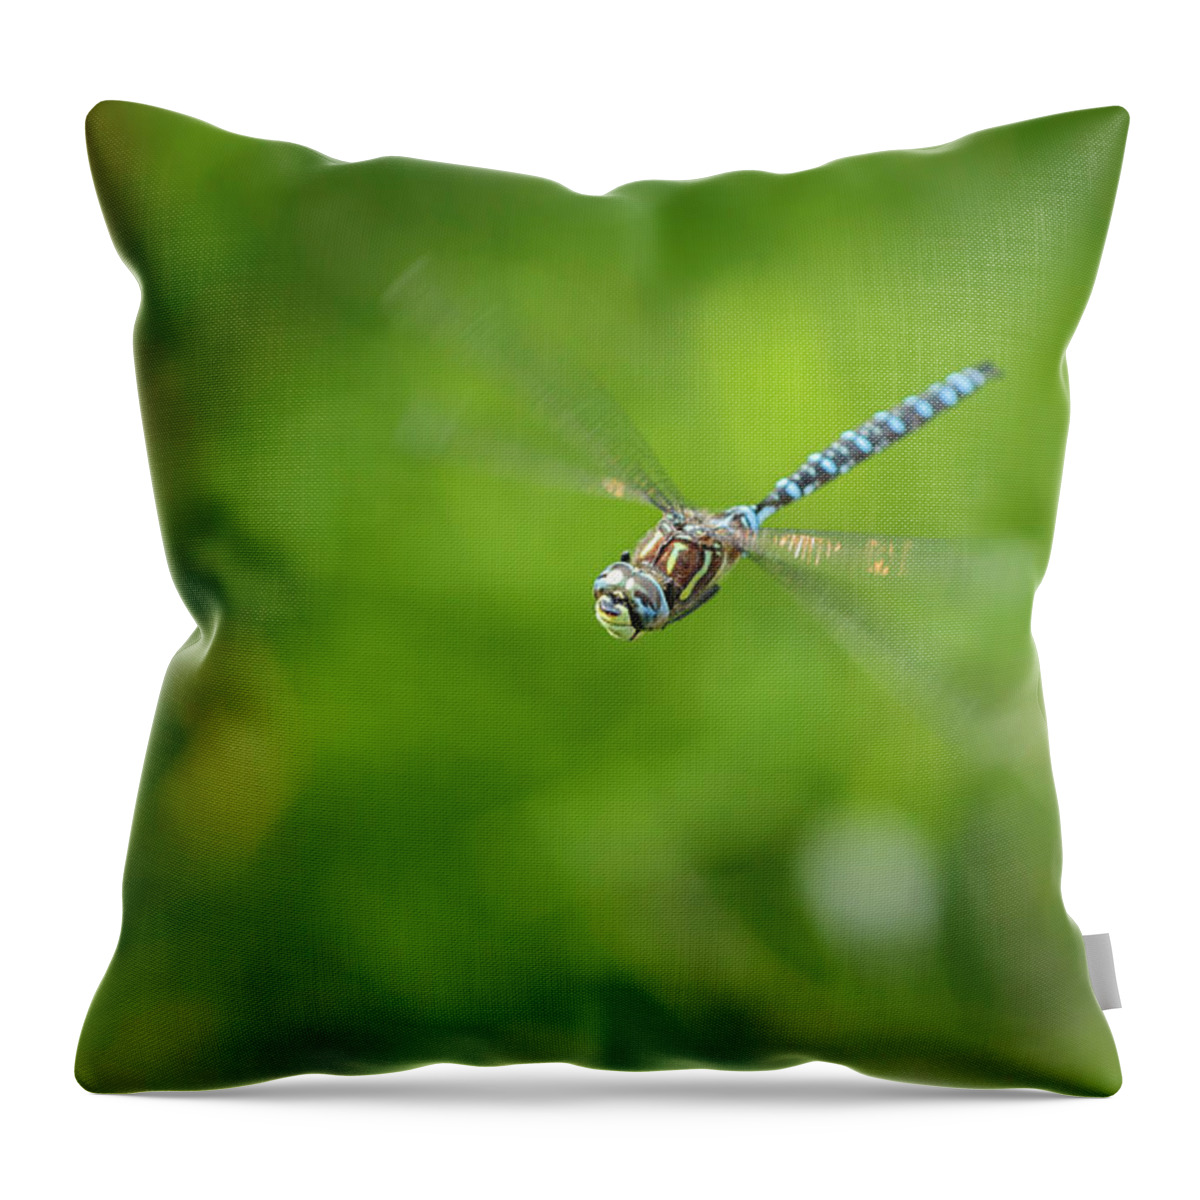 Dragonfly Throw Pillow featuring the photograph Emperor Dragonfly by Rick Deacon